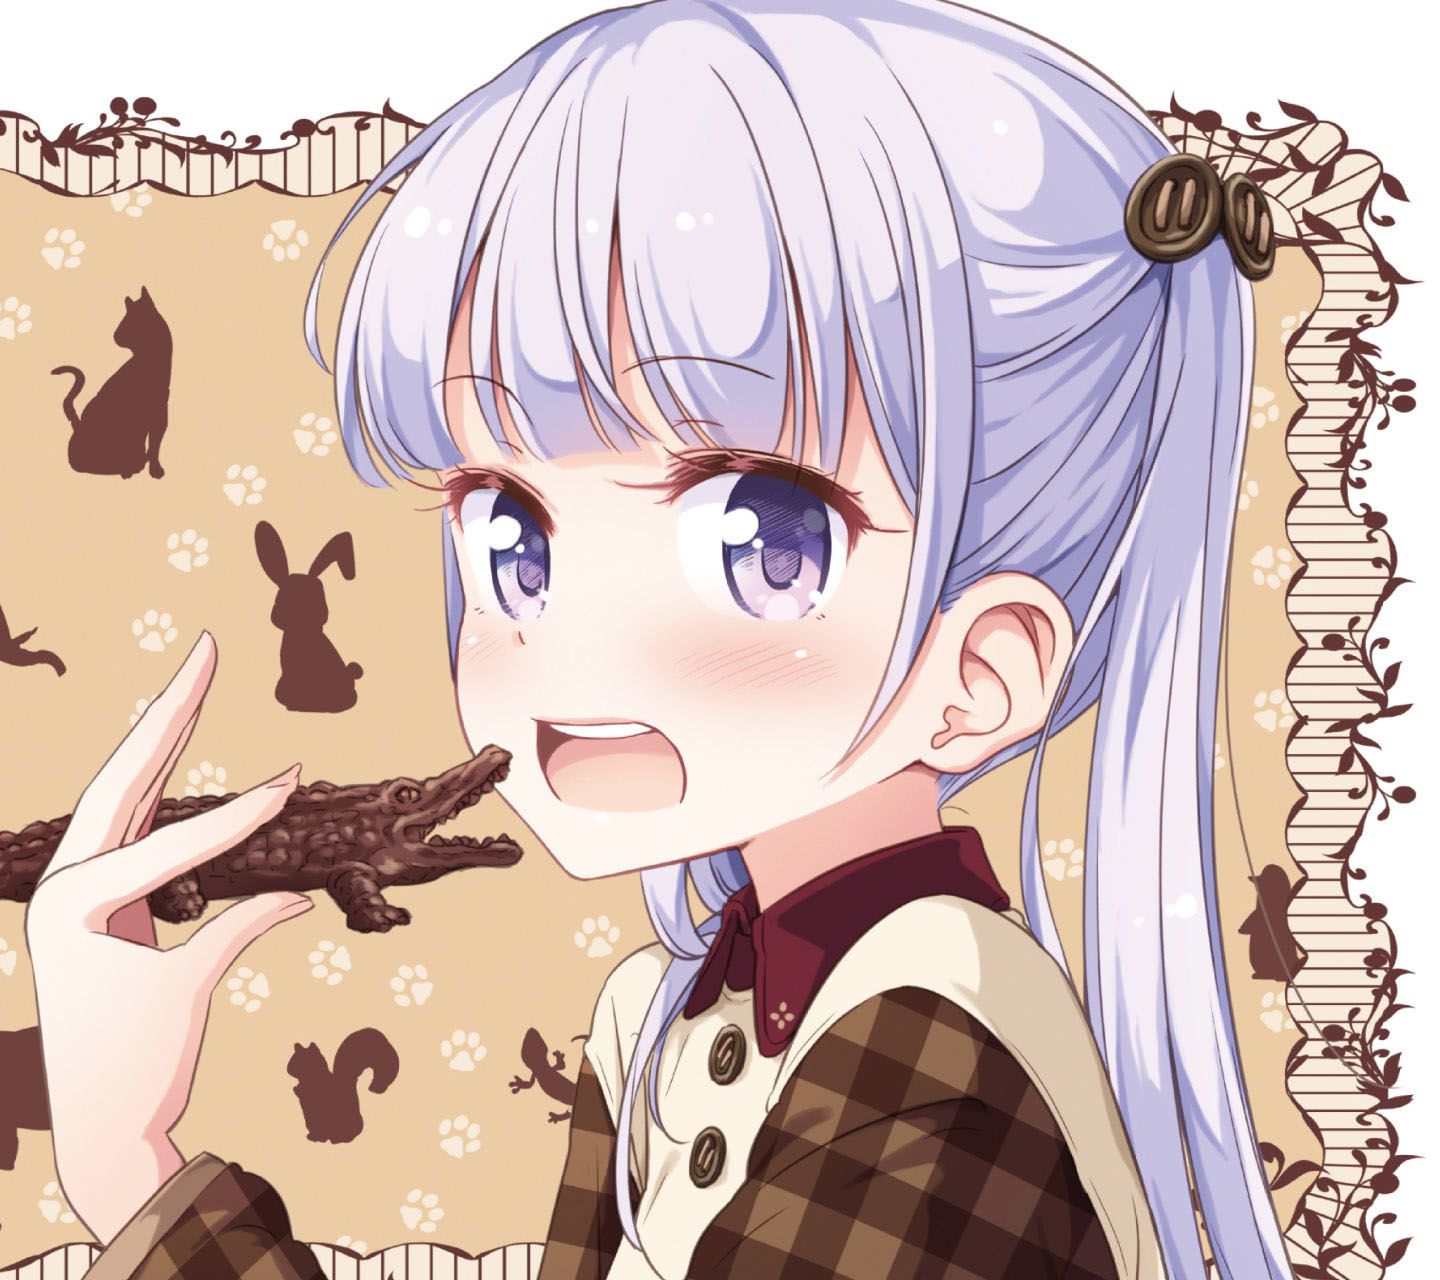 NEW GAME! (ニューゲーム!) Android壁紙 #3 涼風青葉 | アニメ壁紙ネット PC・Android・iPhone壁紙・画像